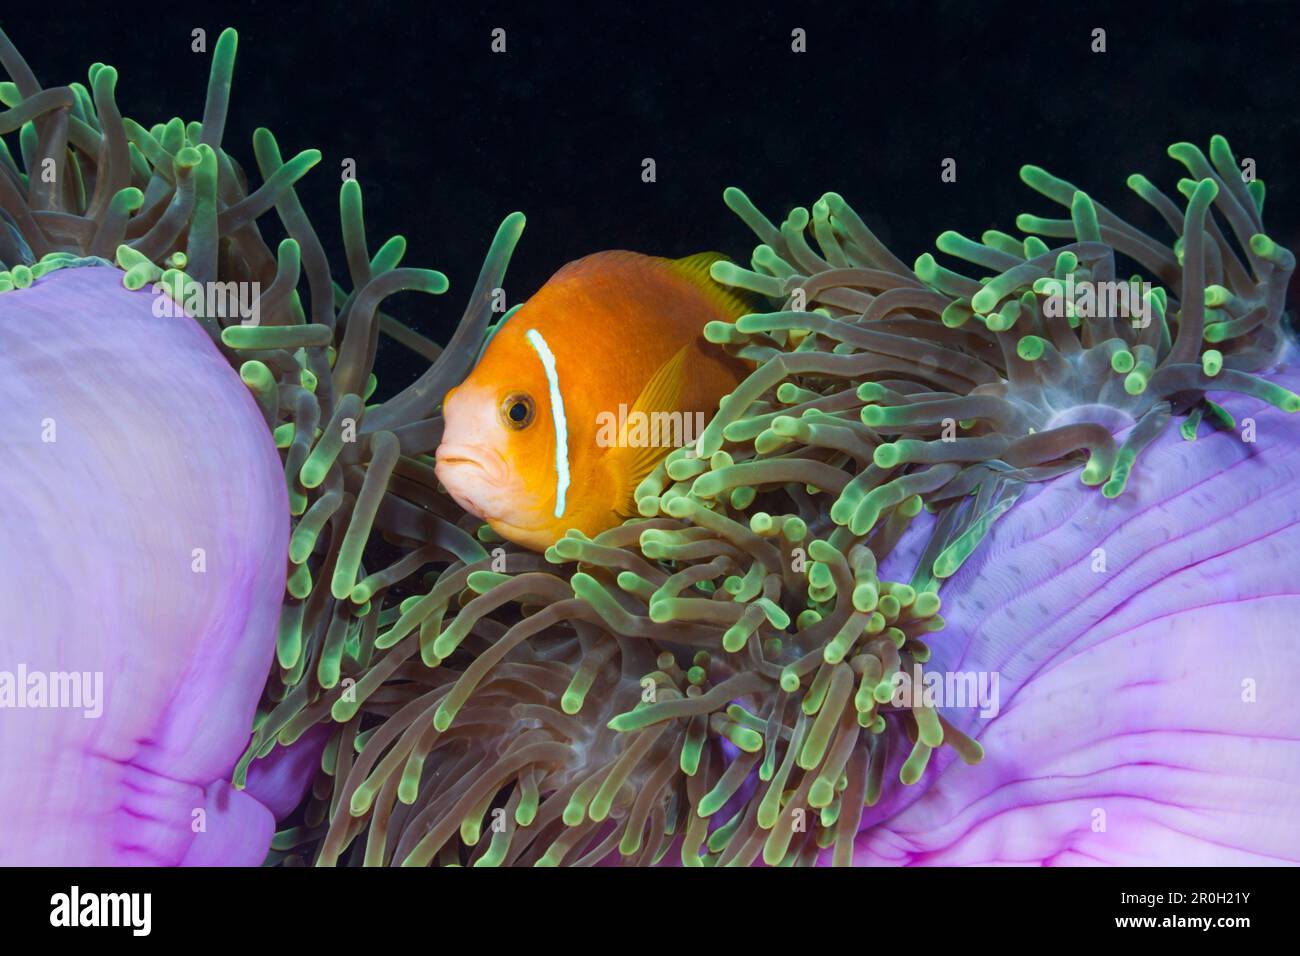 Endemic Maldives Anemonefish in Magnificent Anemone, Amphiprion nigripes, Heteractis magnifica, Baa Atoll, Indian Ocean, Maldives Stock Photo